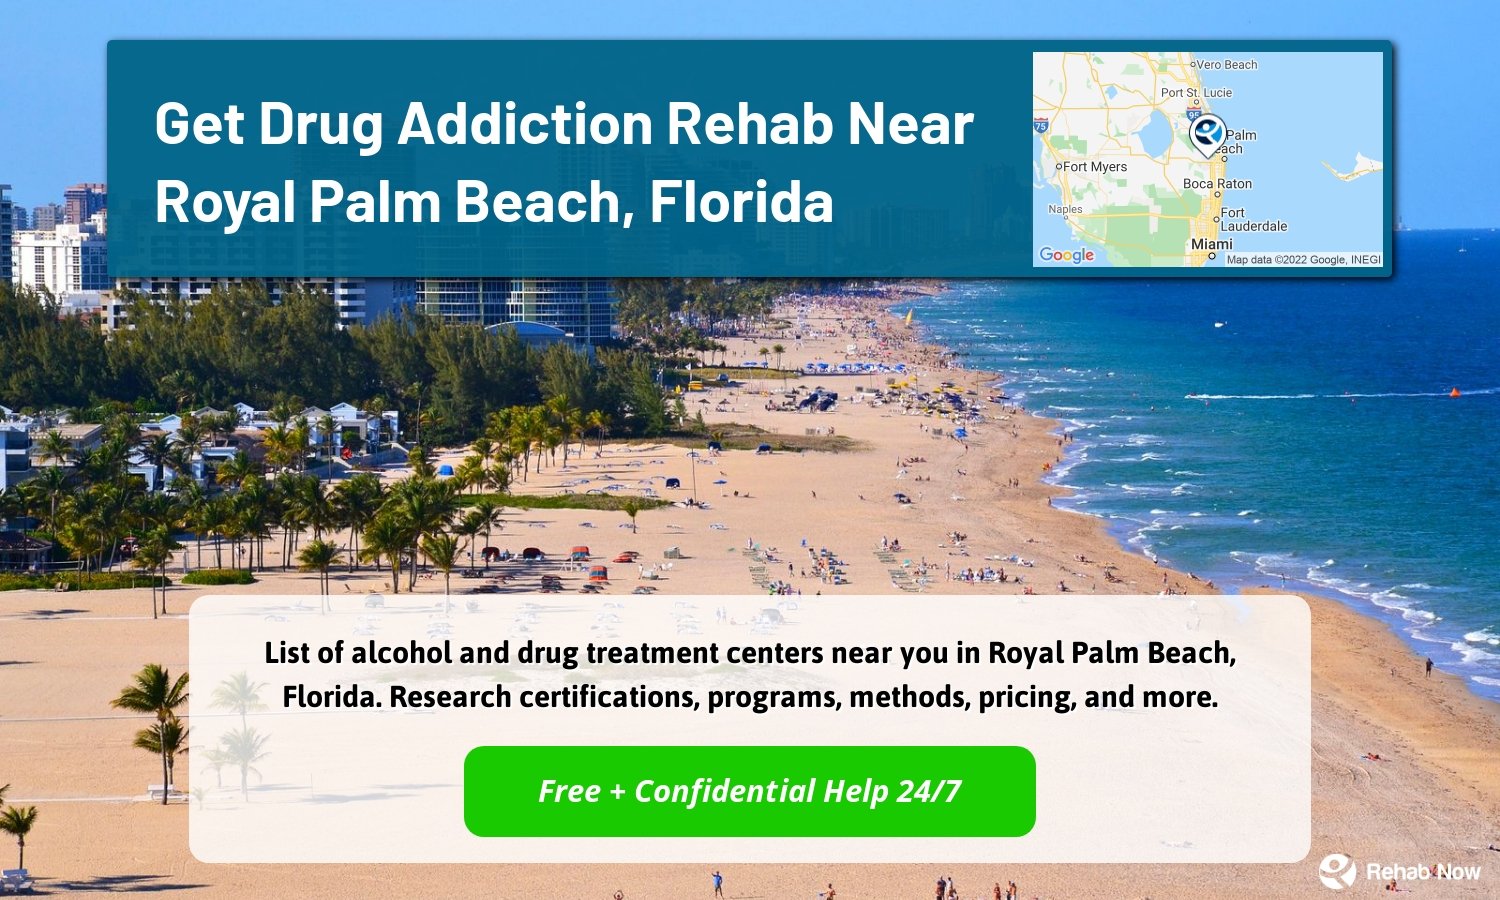 List of alcohol and drug treatment centers near you in Royal Palm Beach, Florida. Research certifications, programs, methods, pricing, and more.